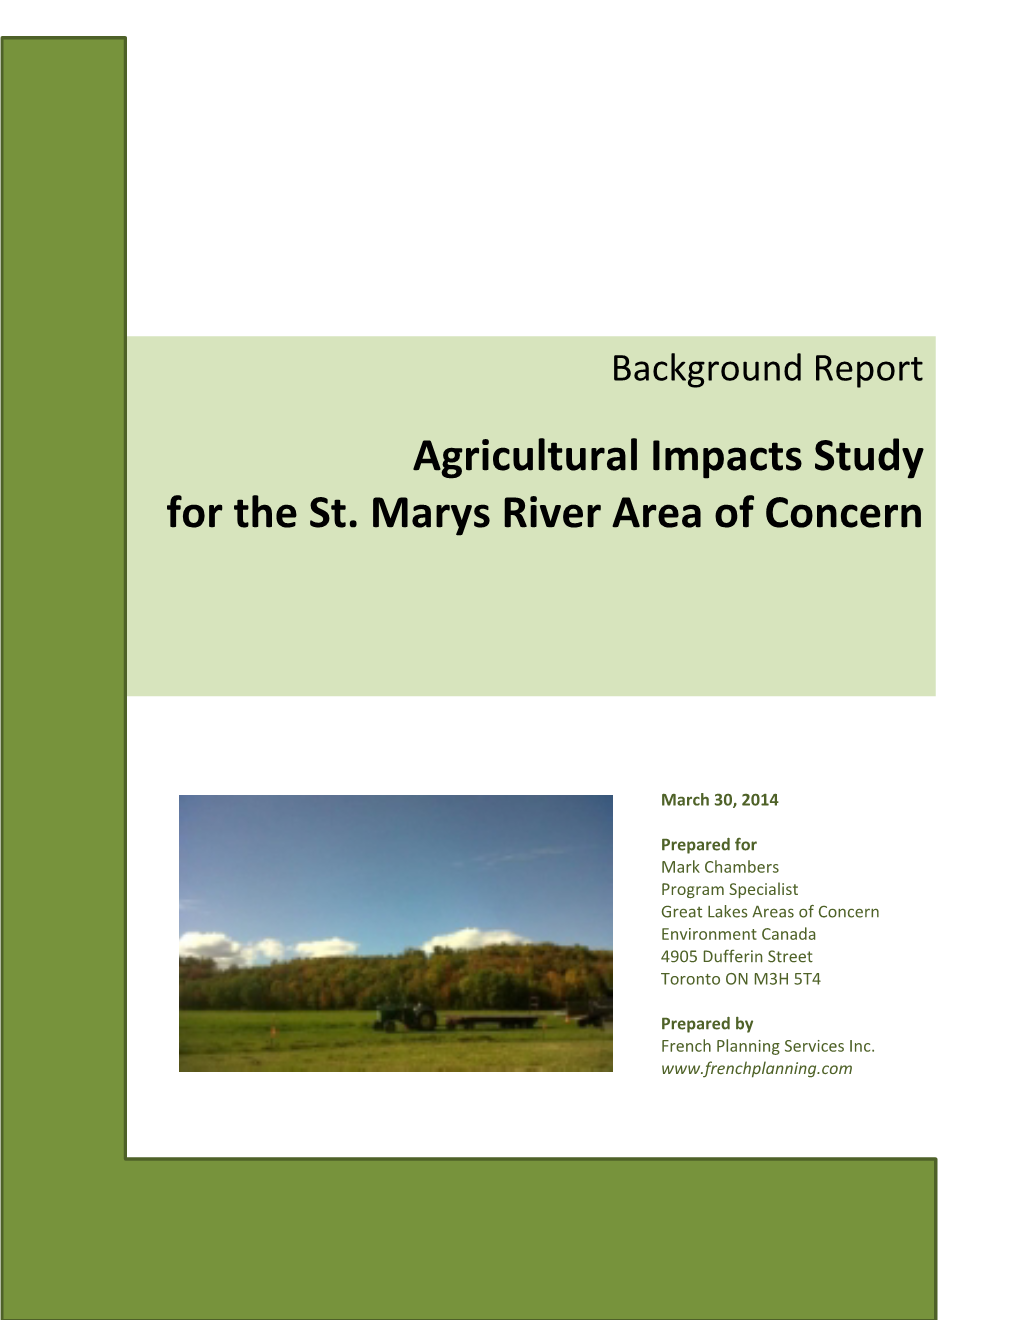 Agricultural Impacts Study for the St. Marys River Area of Concern